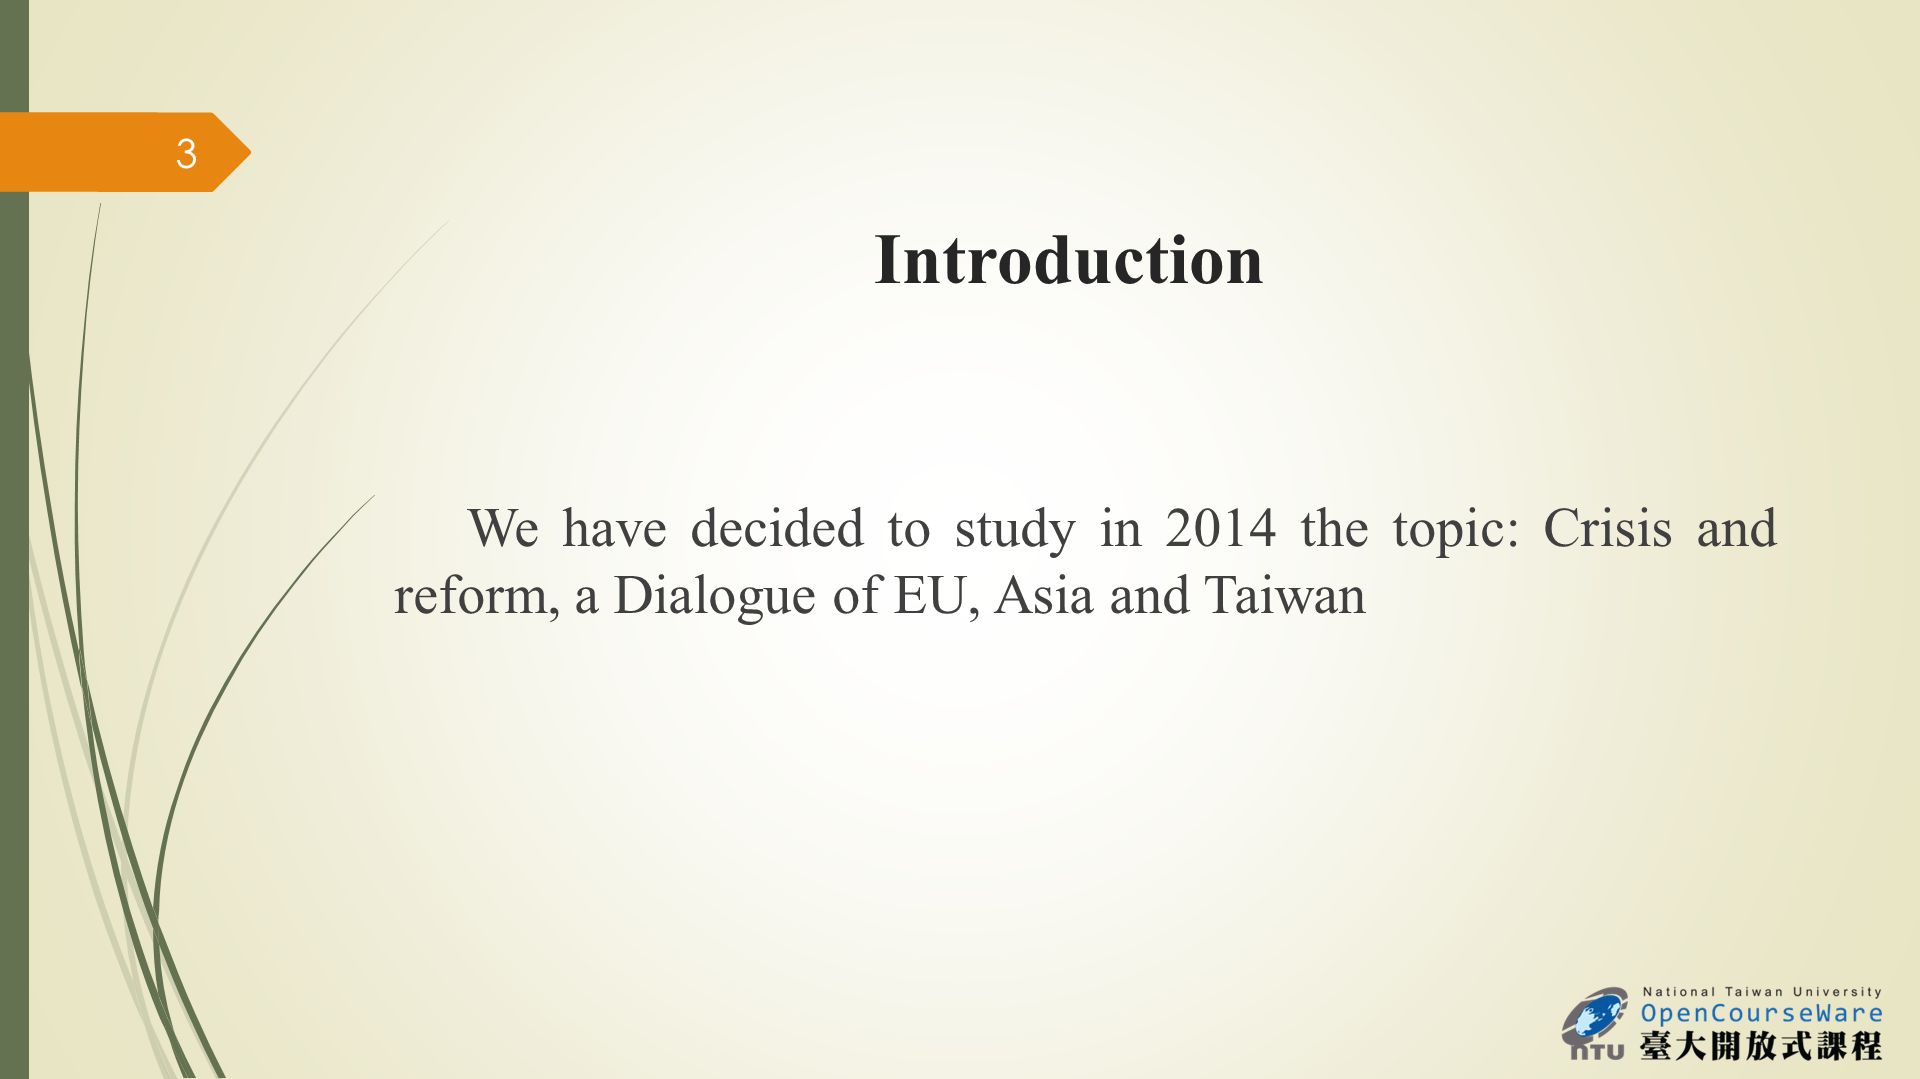 Introduction We have decided to study in 2014 the topic: Crisis and reform, a Dialogue of EU, Asia and Taiwan 3